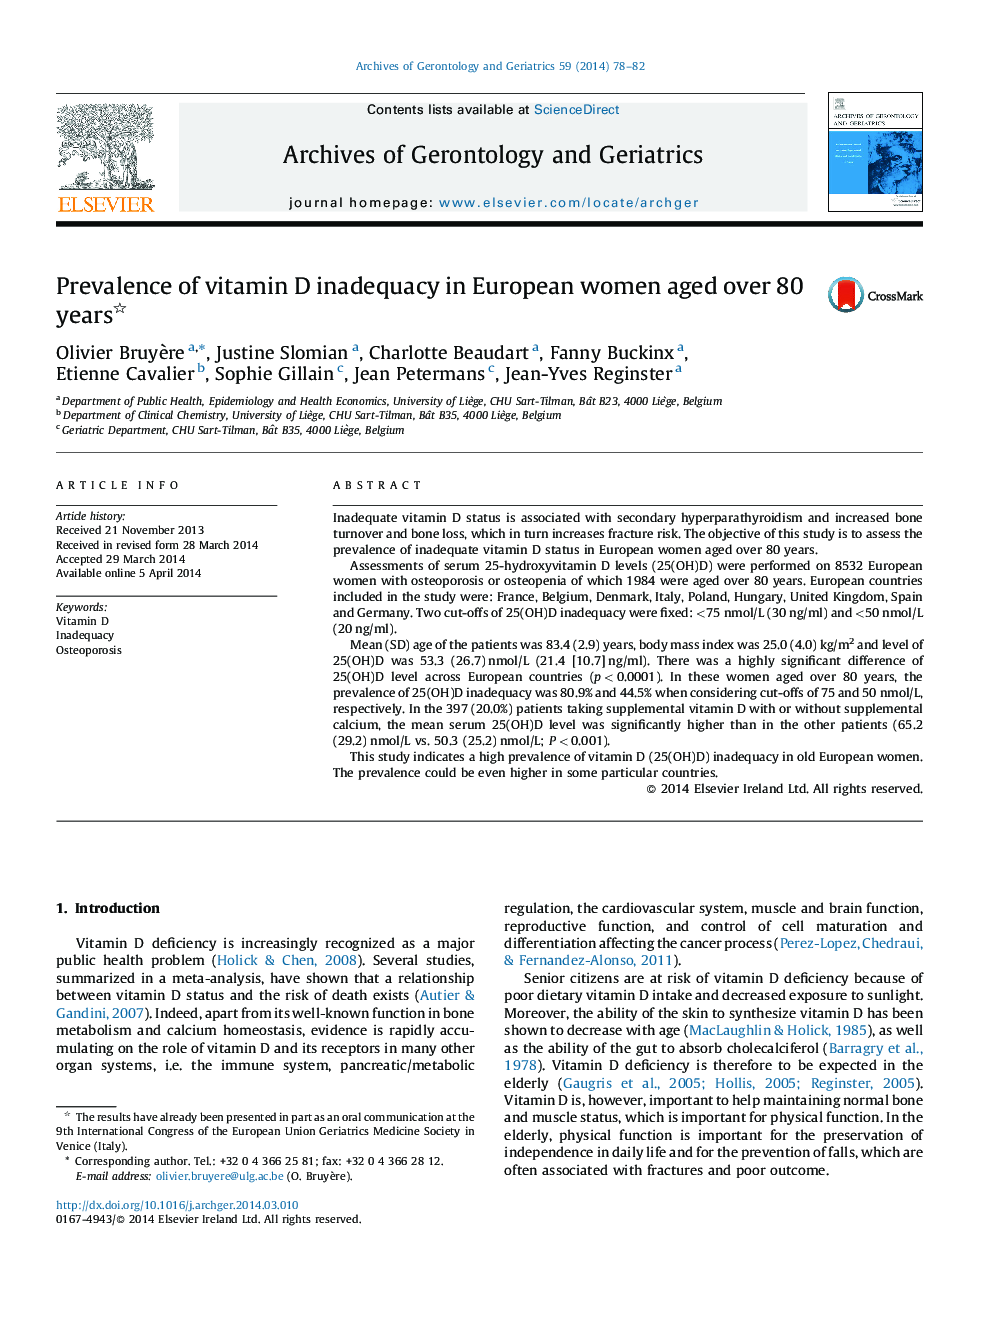 Prevalence of vitamin D inadequacy in European women aged over 80 years 